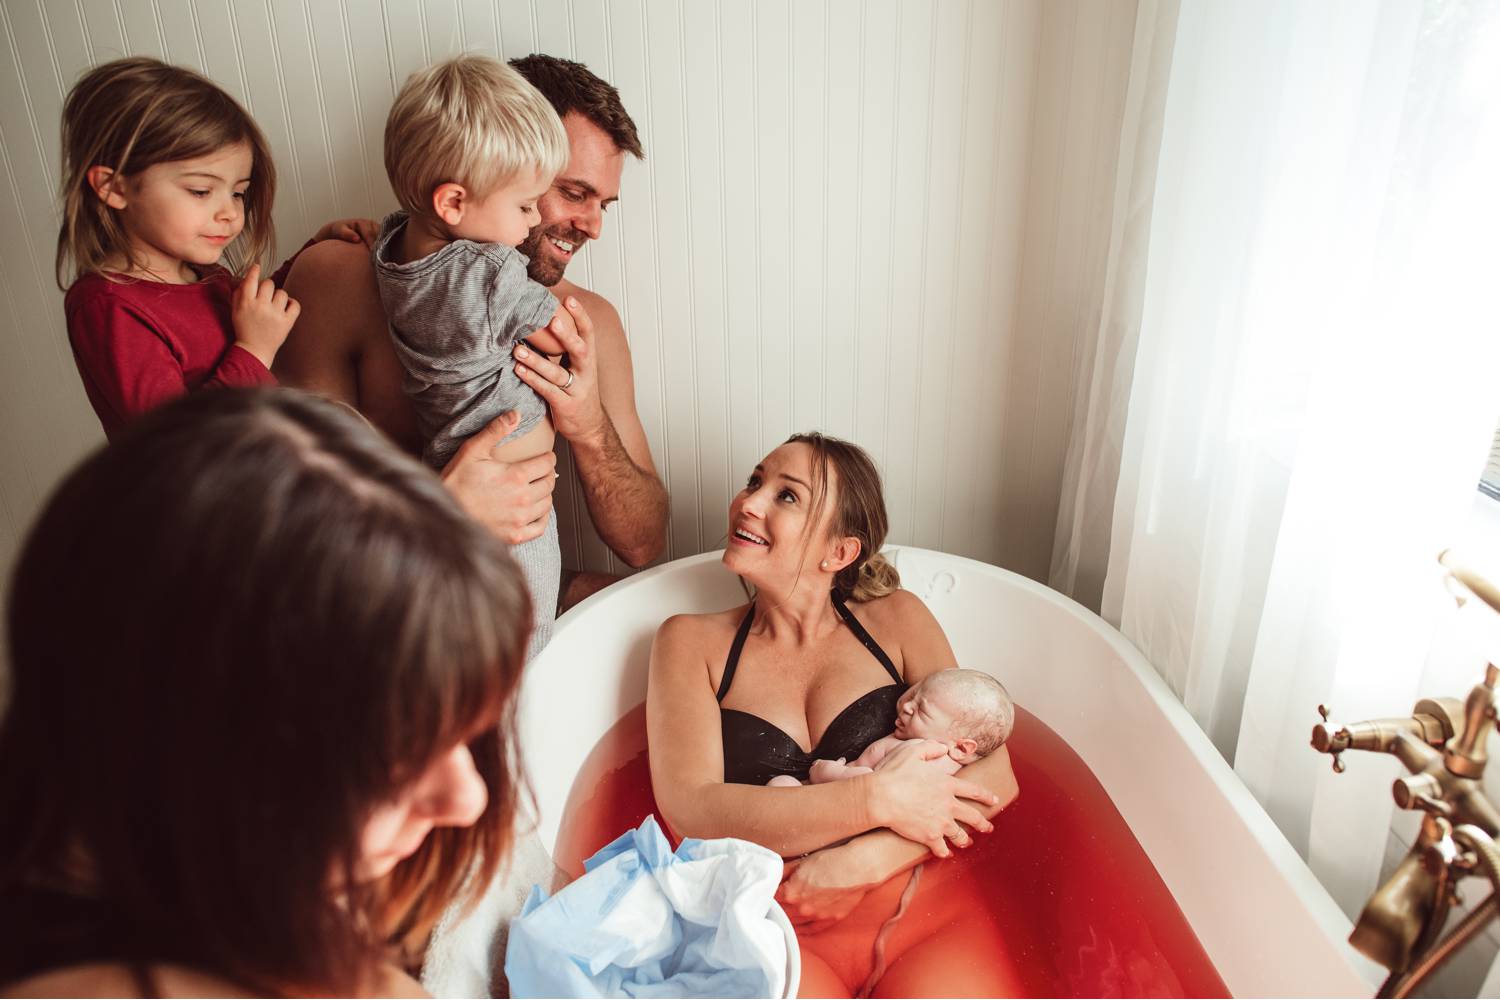 A woman sits in a tub full of red-tinged water holding the new baby she just birthed as her partner and children look on